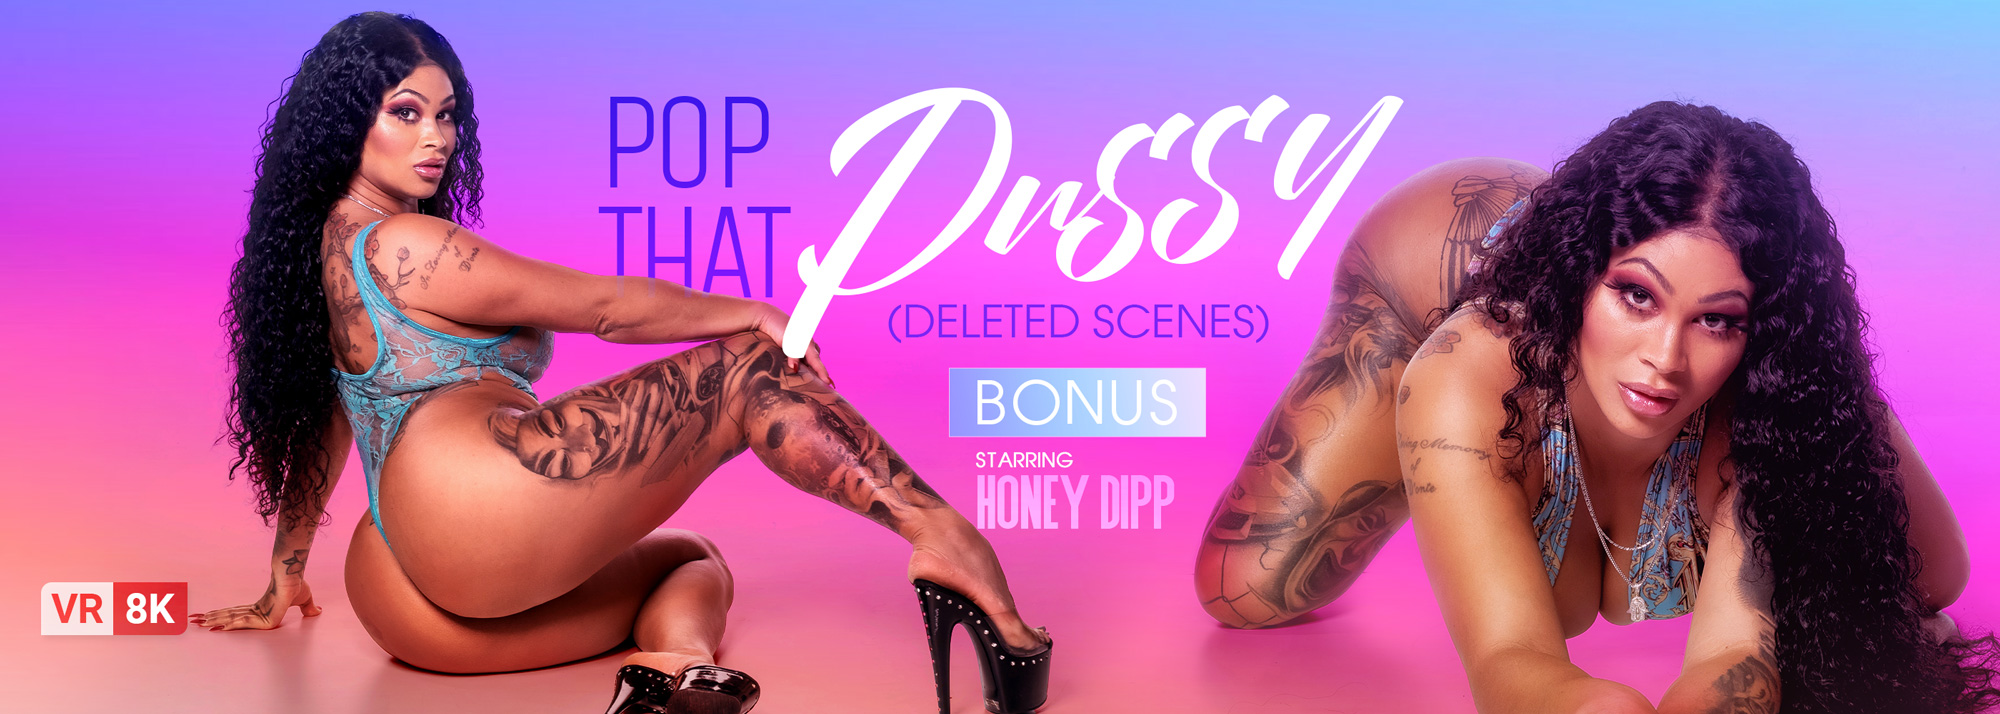 Pop That Pussy (Deleted Scenes) - VR Porn Video, Starring: Honey Dipp